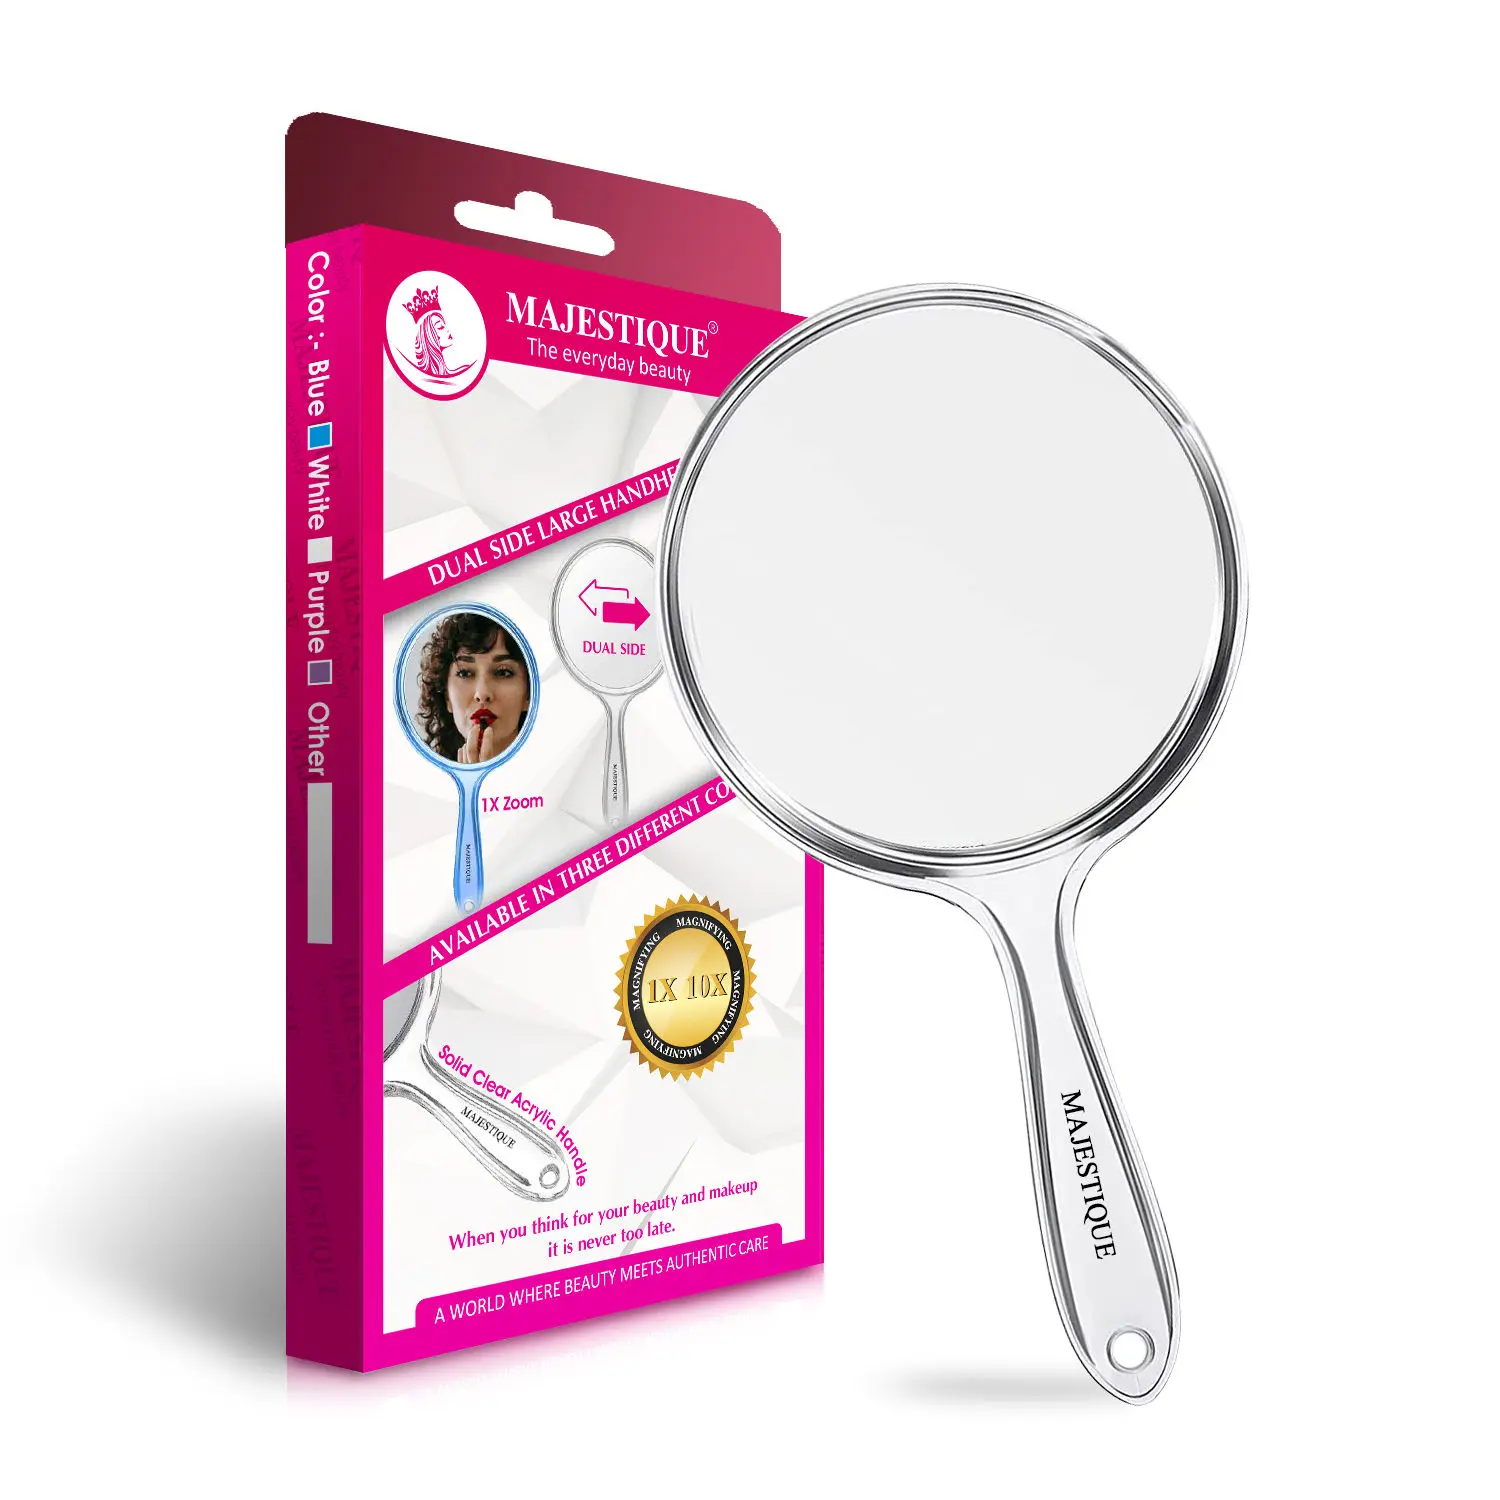 Majestique Dual Side Large Handheld Mirror, 1X/10X Magnifying Mirror Perfect for Shaving, Makeup - Multicolor